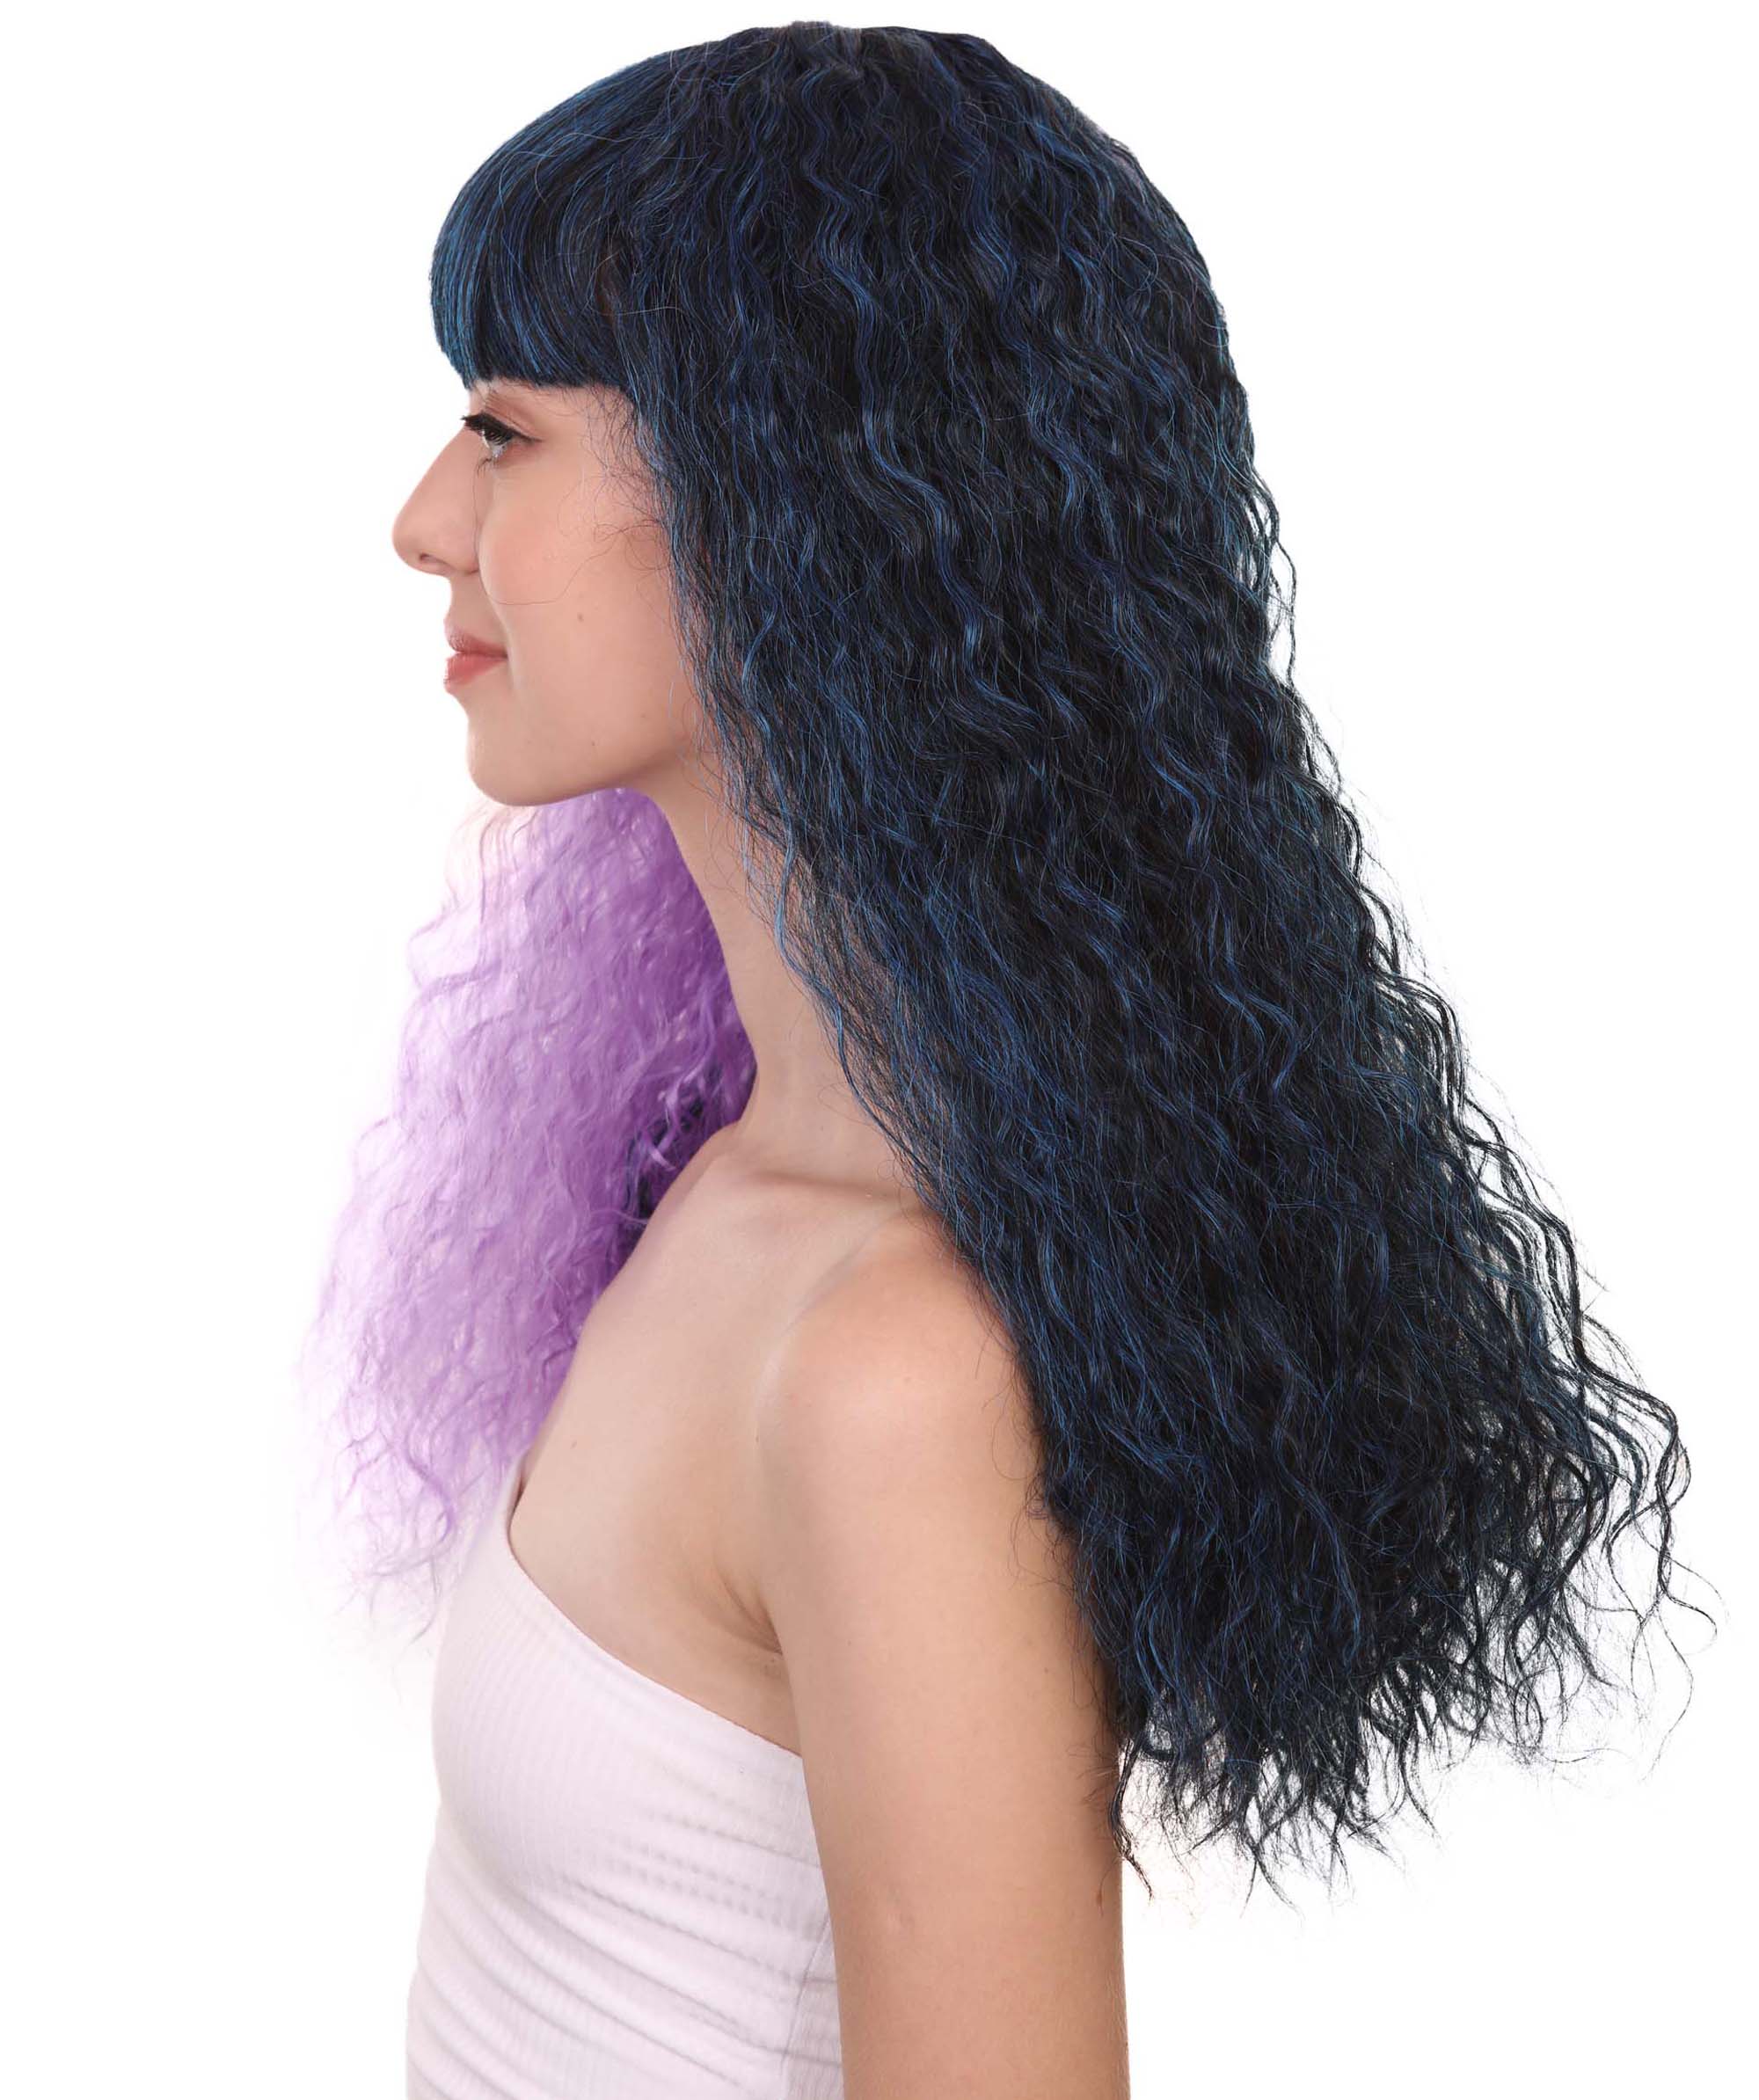 black and purple curly hair